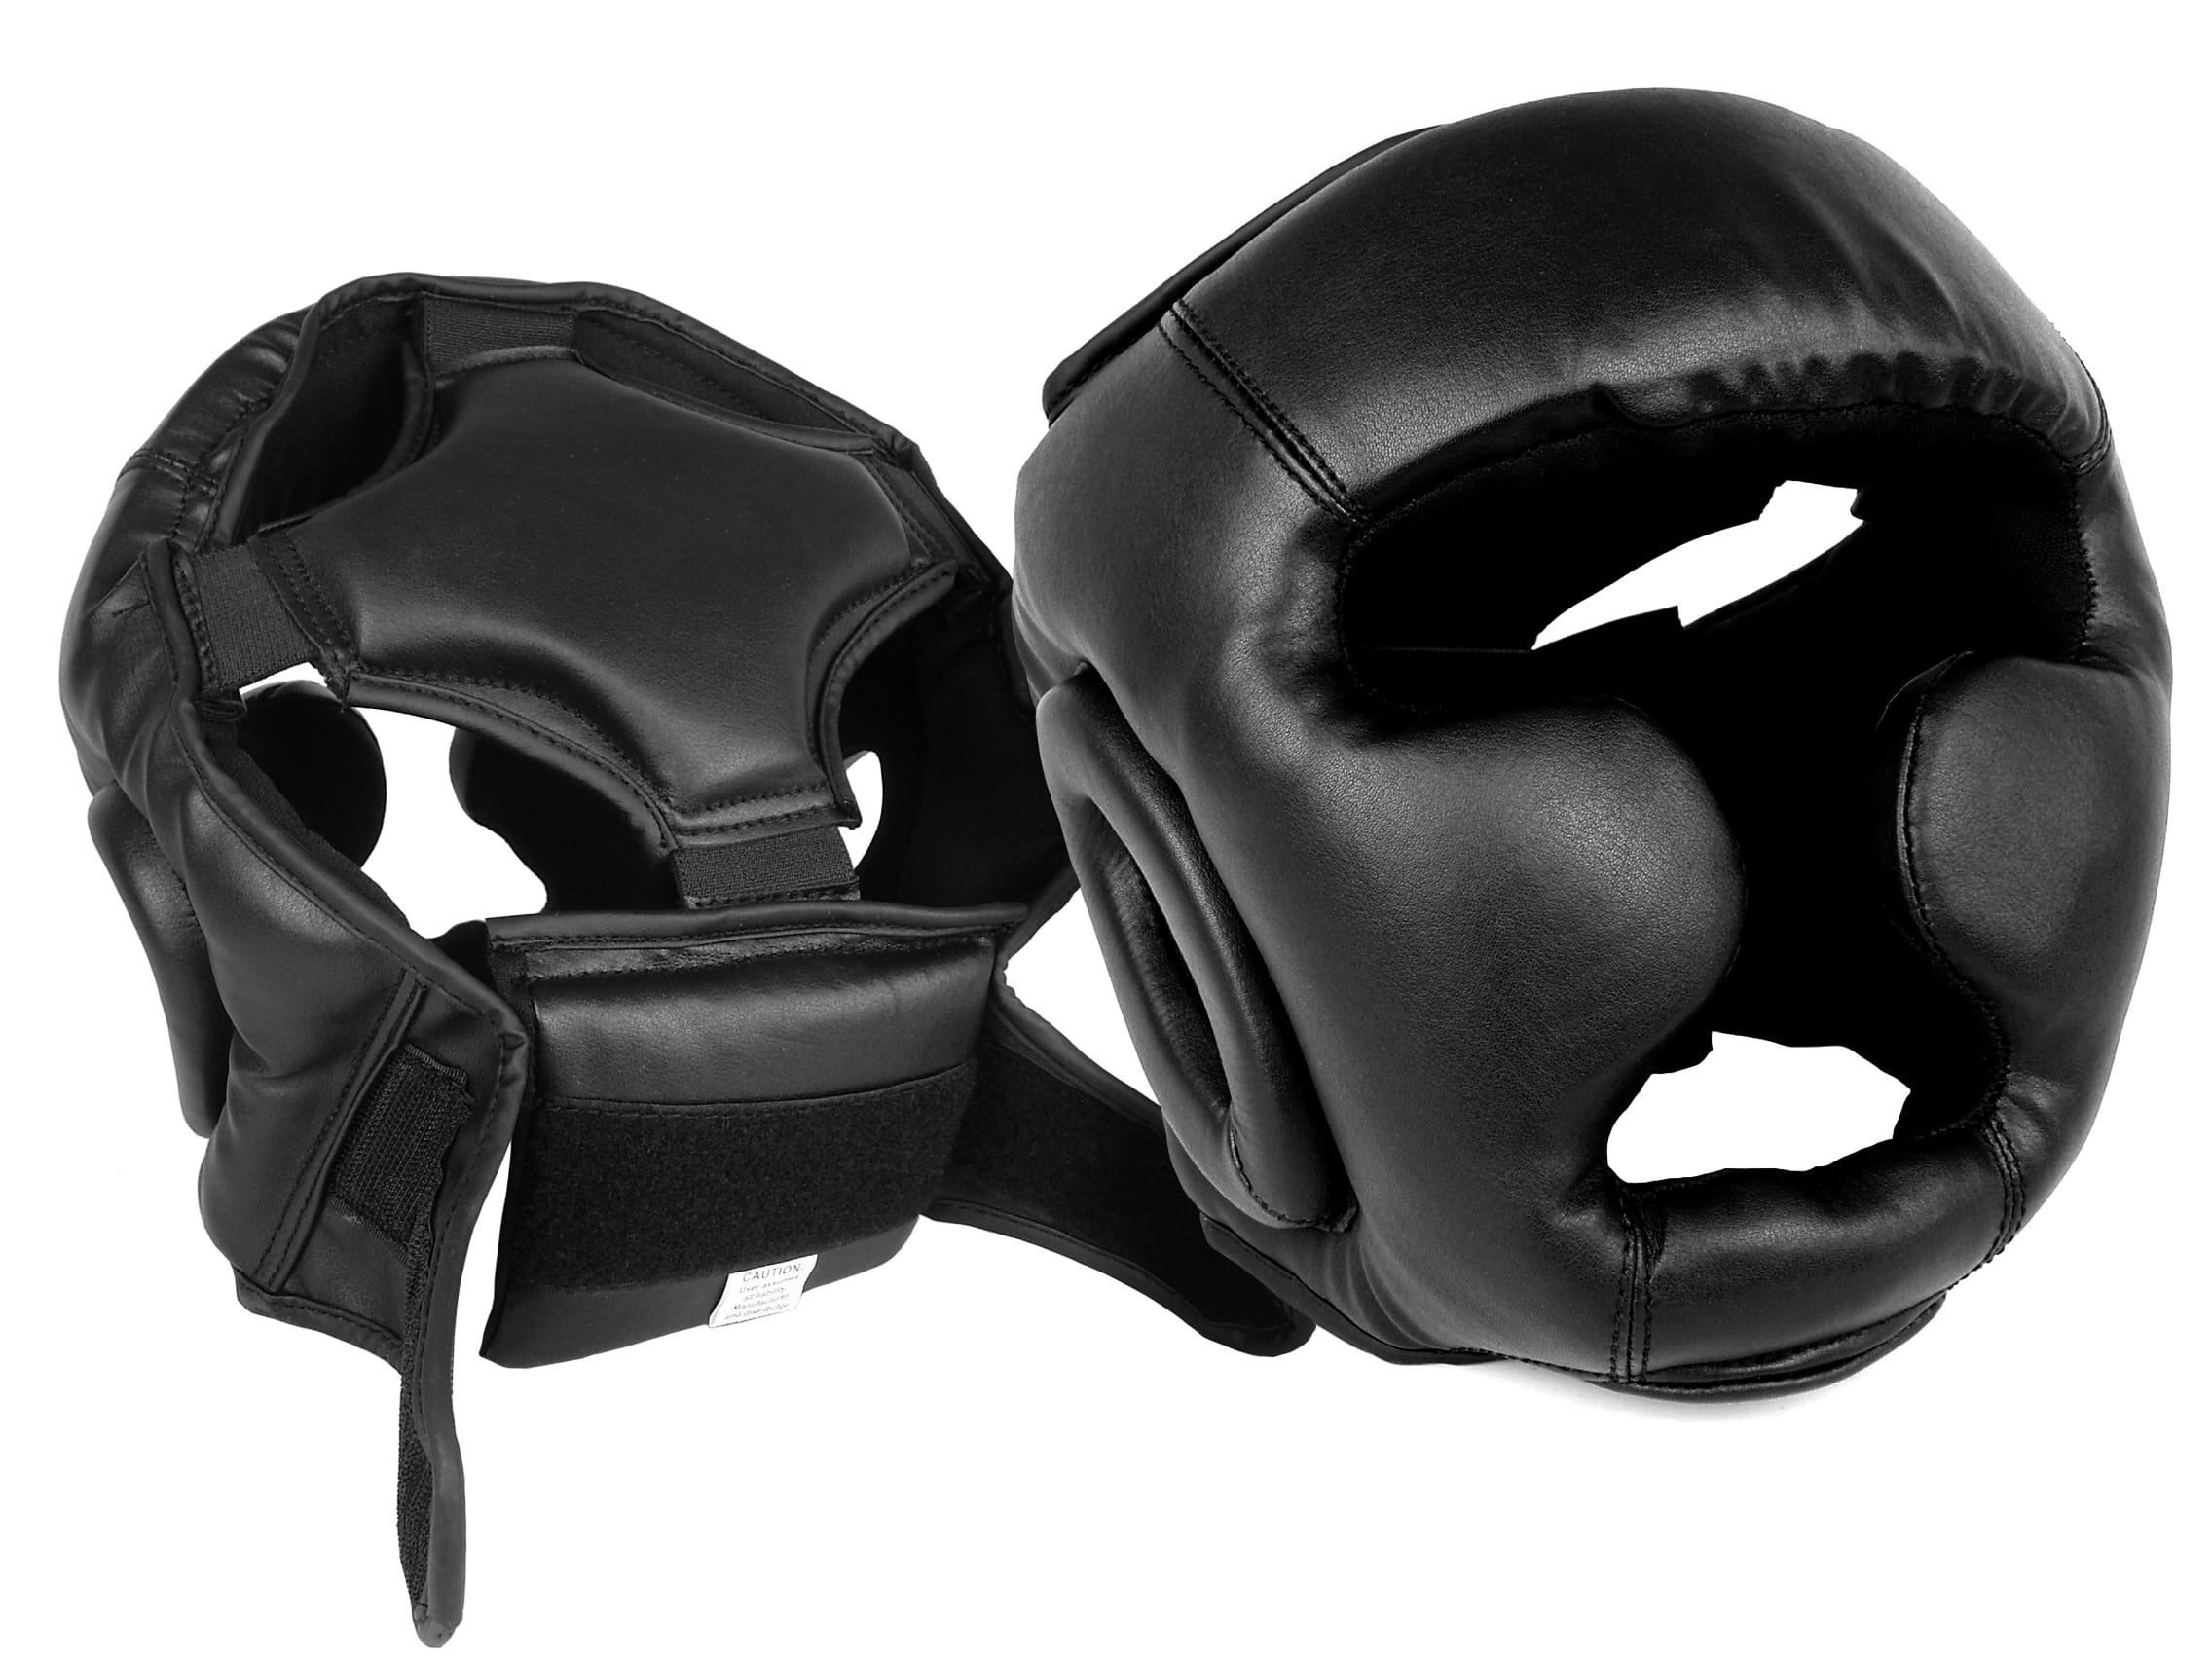 PU Leather Head Guard Sparring Helmet for Boxing UFC MMA Kickboxing Head Gear LASTSTAND Boxing Headgear for Men and Women Martial Arts 